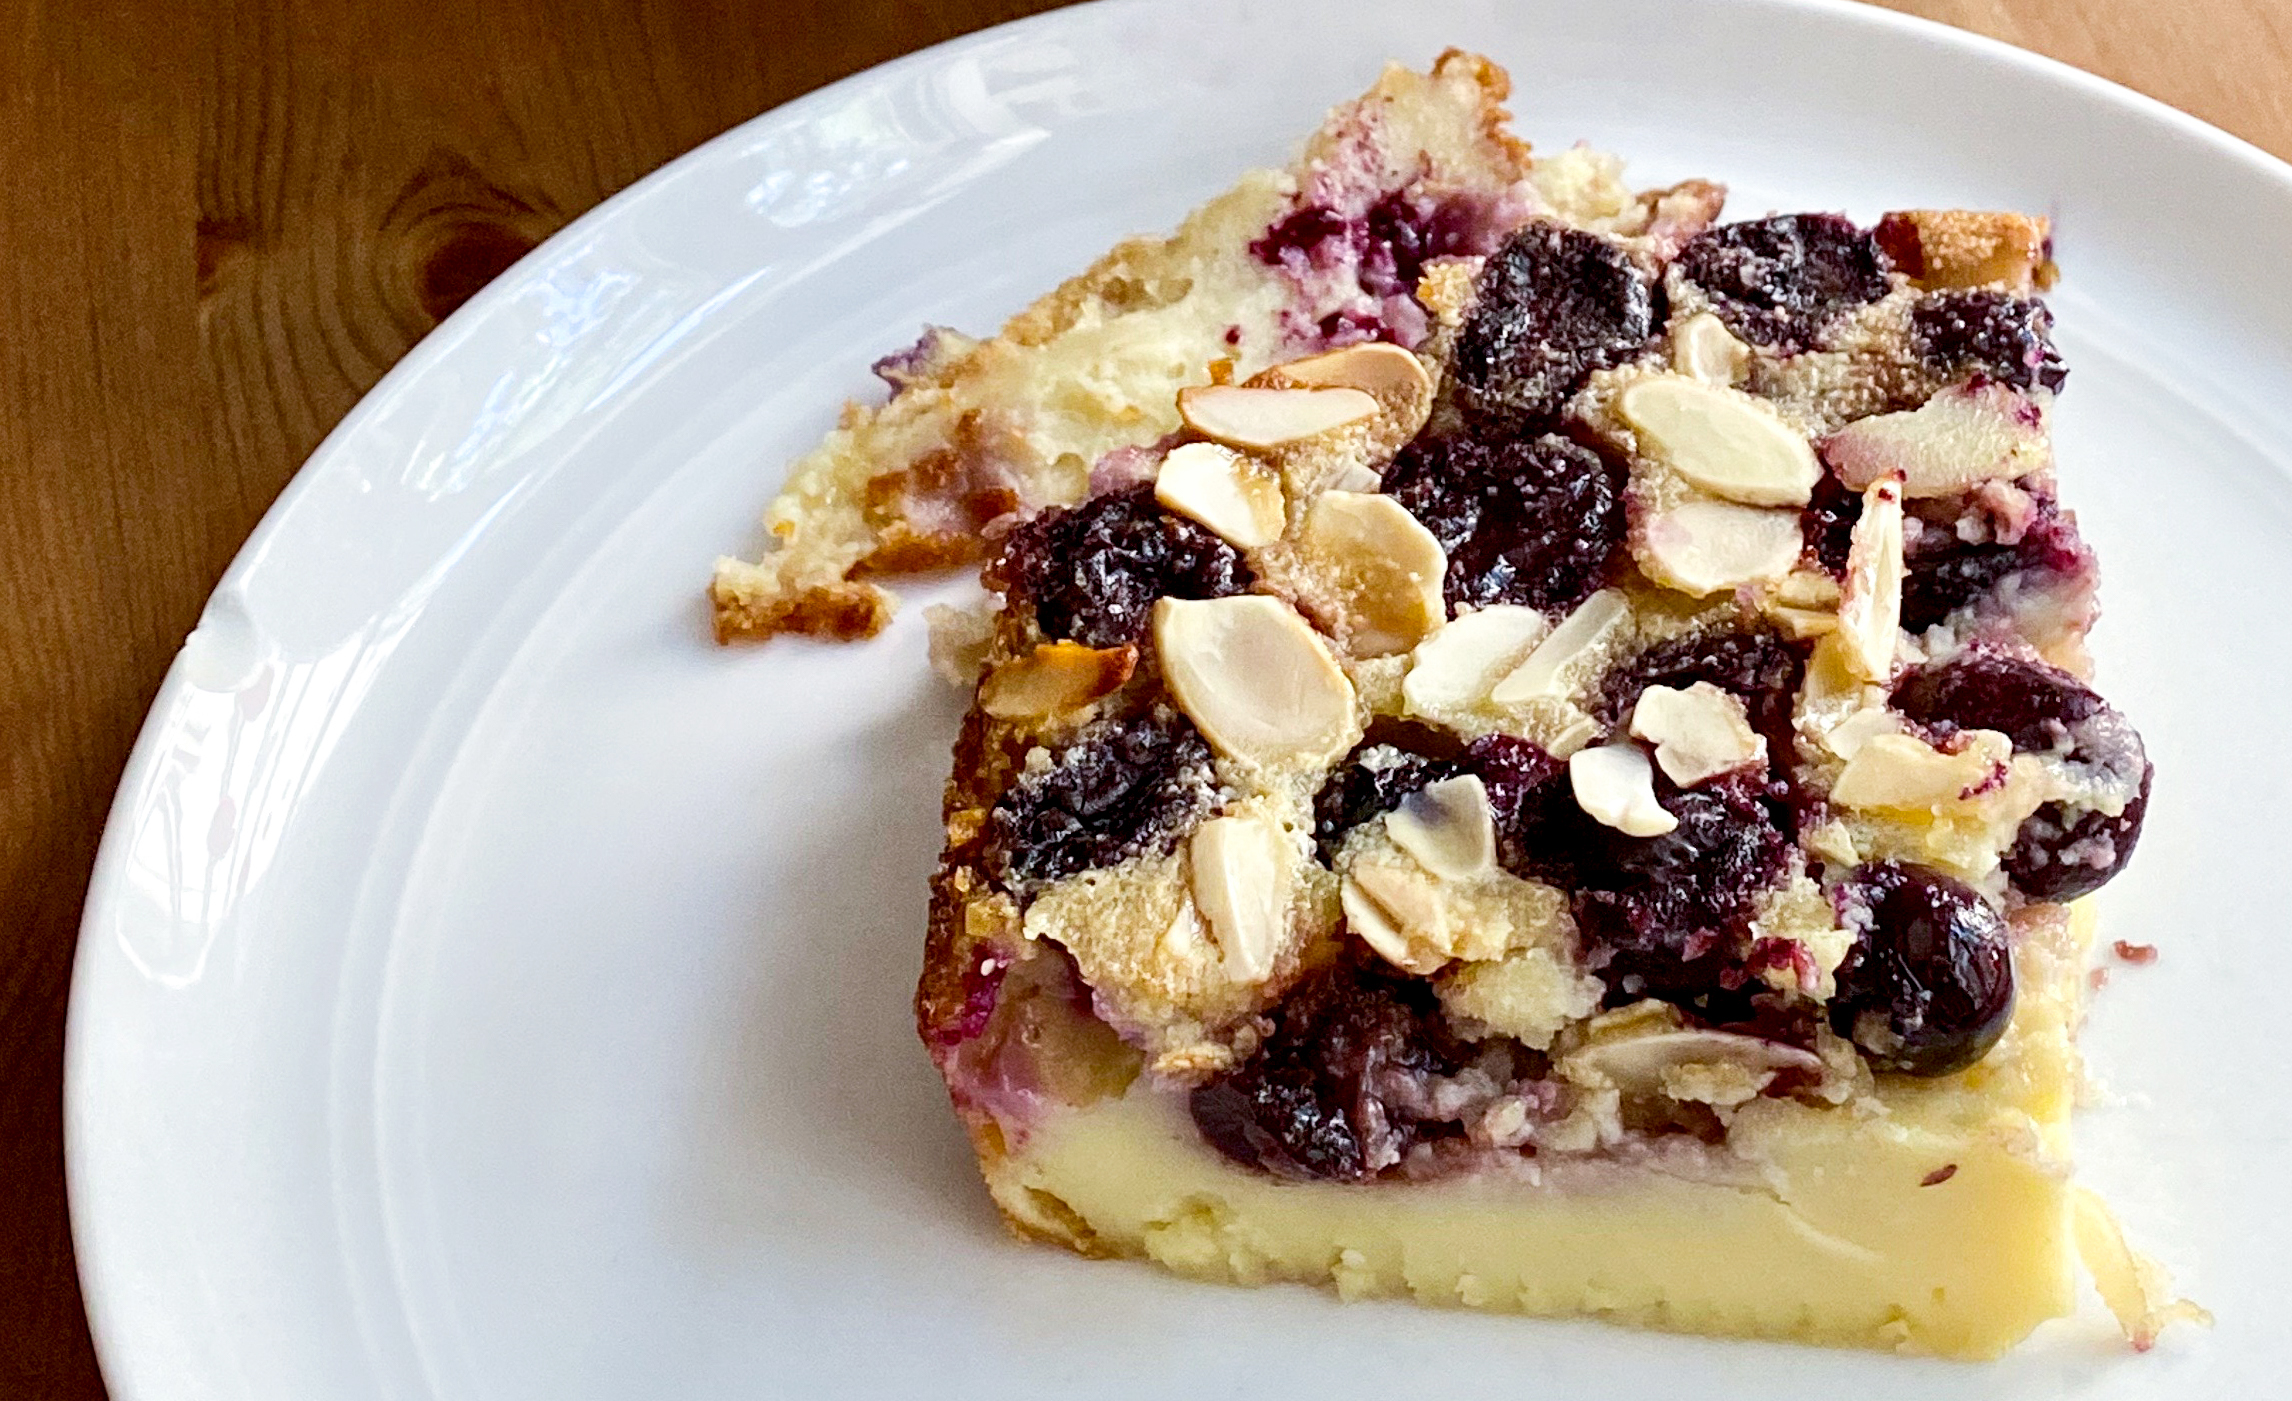 CLAFOUTIS aux CERISES: French Baked Flan Cake with Cherries